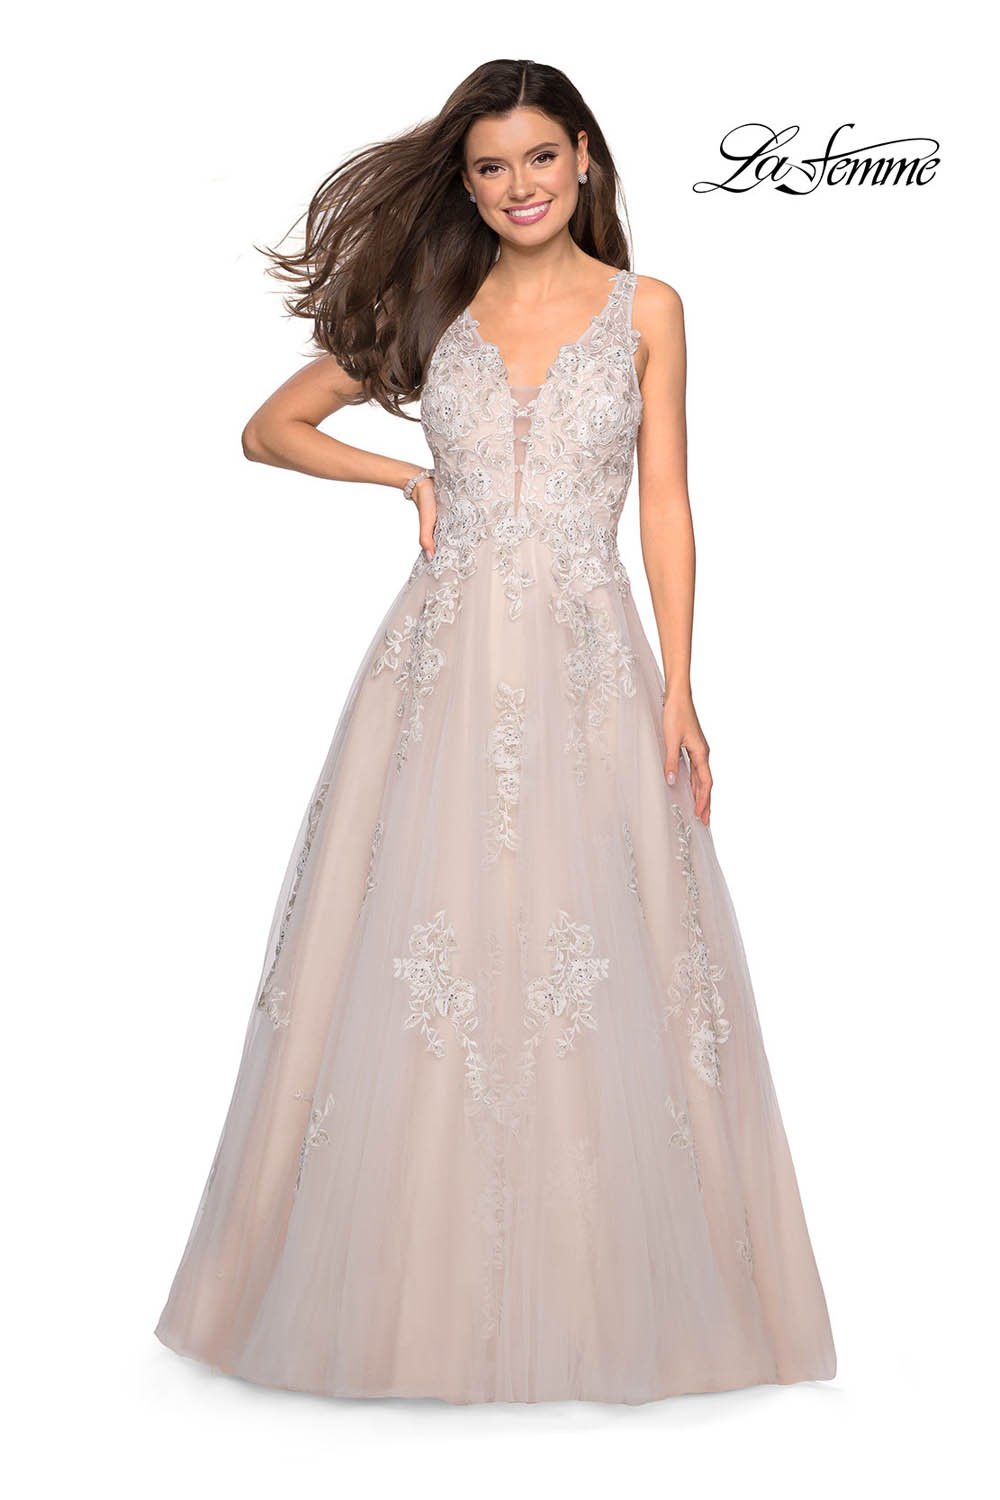 Gigi by La Femme 27727 dress images in these colors: Ivory Nude, Periwinkle.